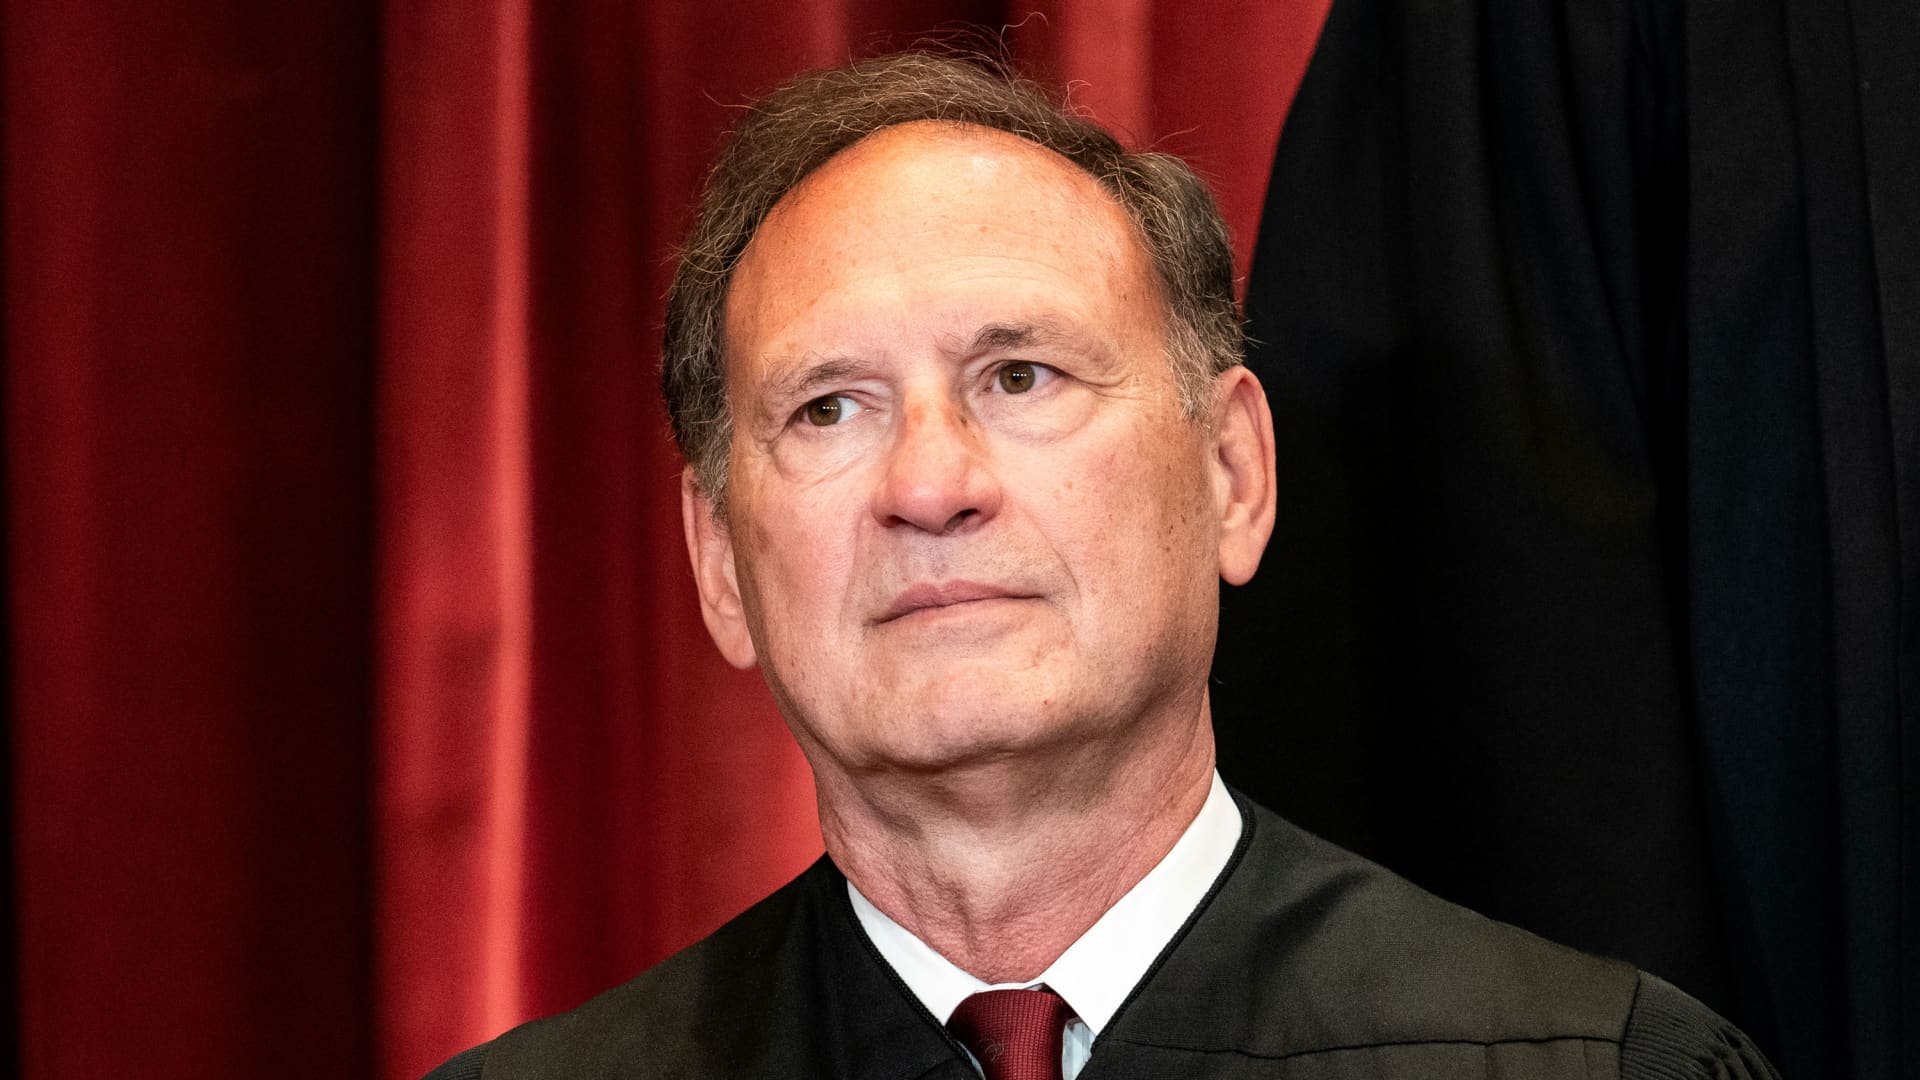 Associate Justice Samuel Alito poses during a group photo of the Justices at the Supreme Court in Washington, April 23, 2021.